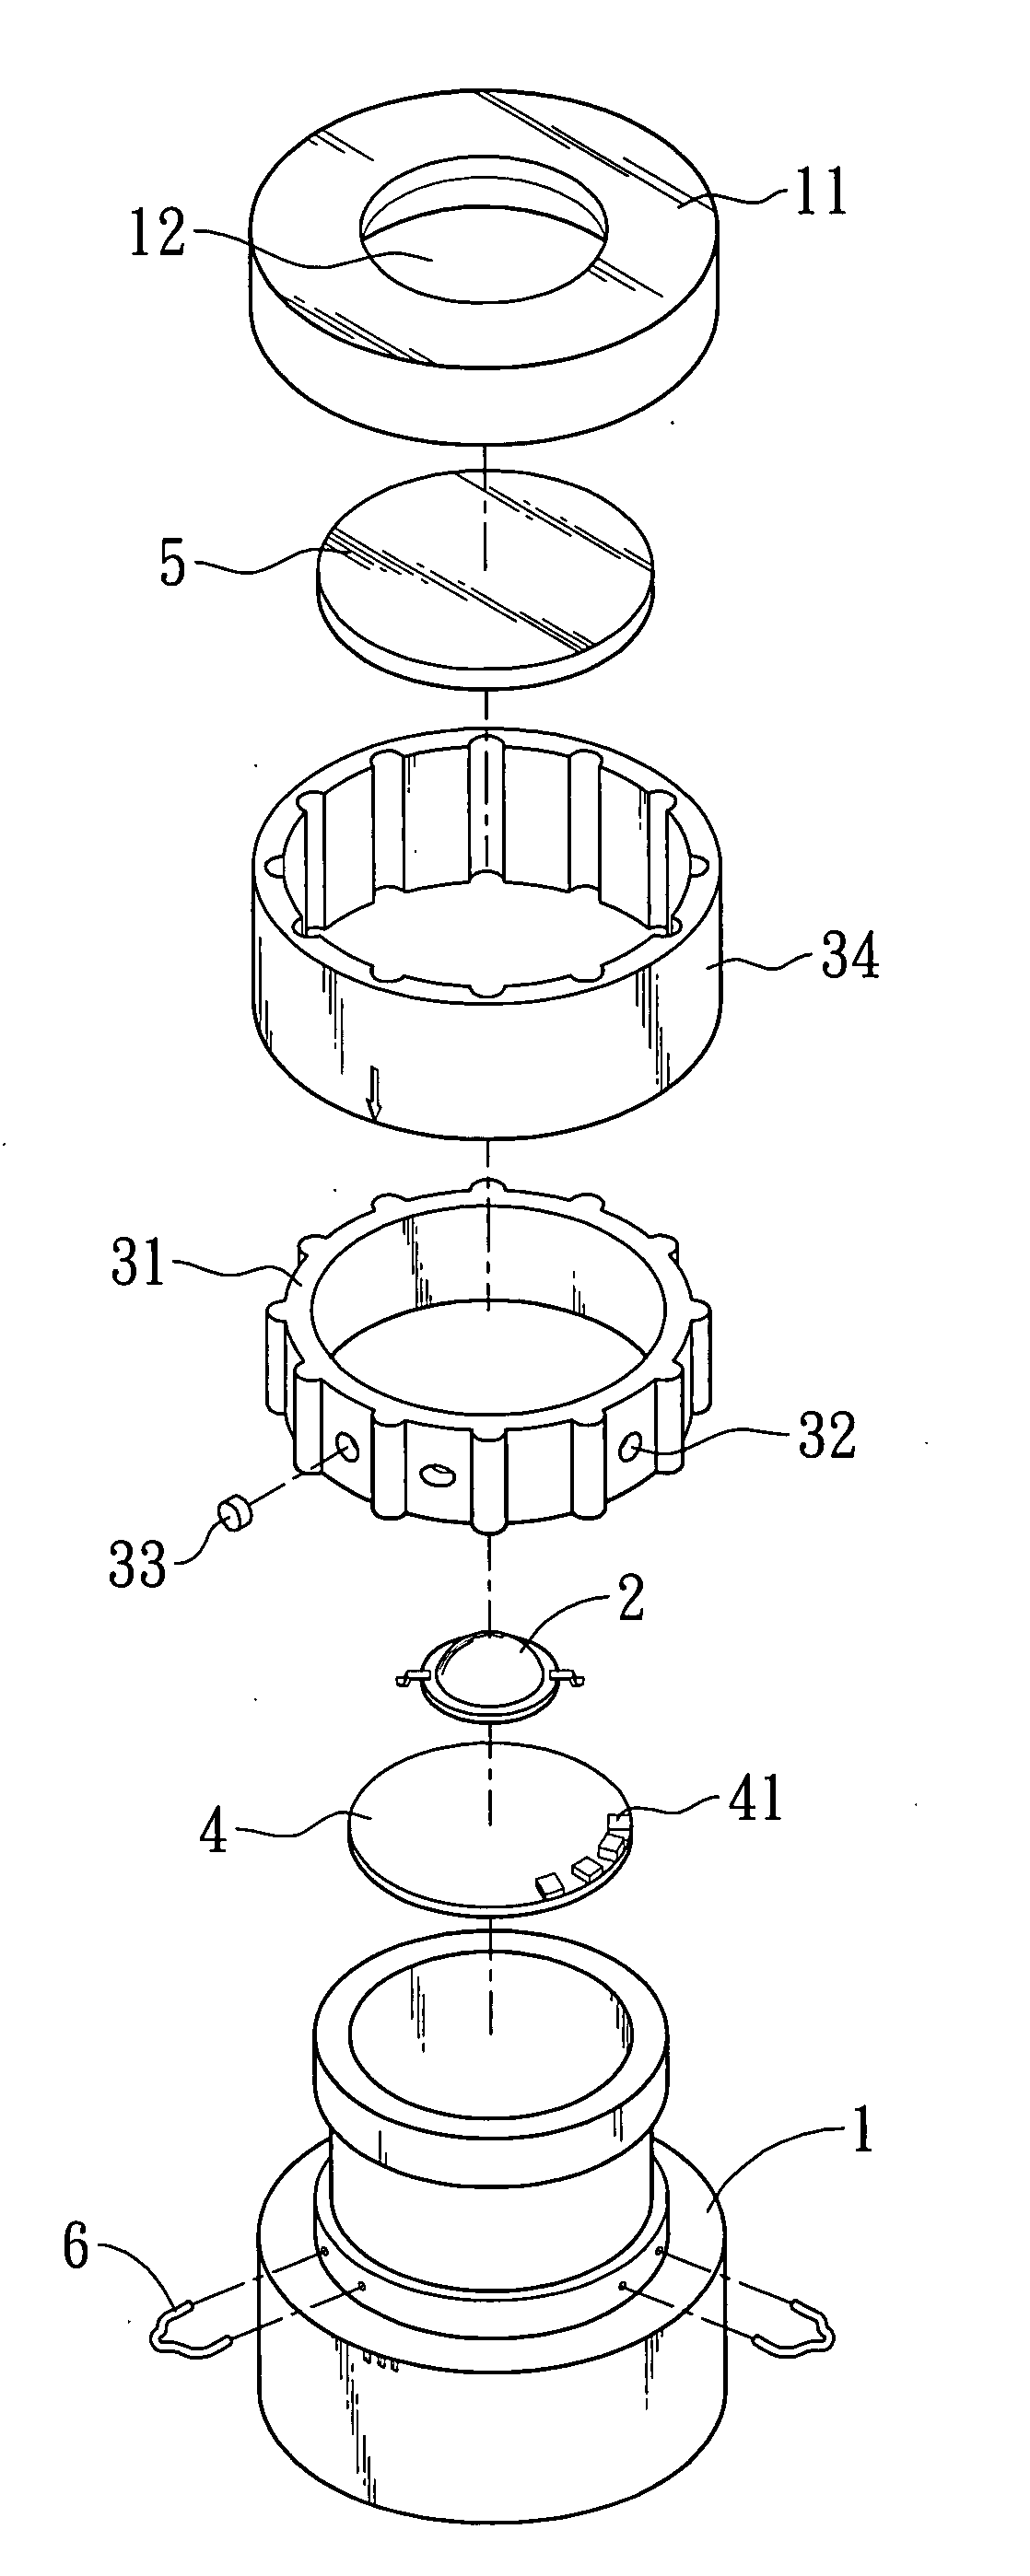 Lighting device with a magnetic switch